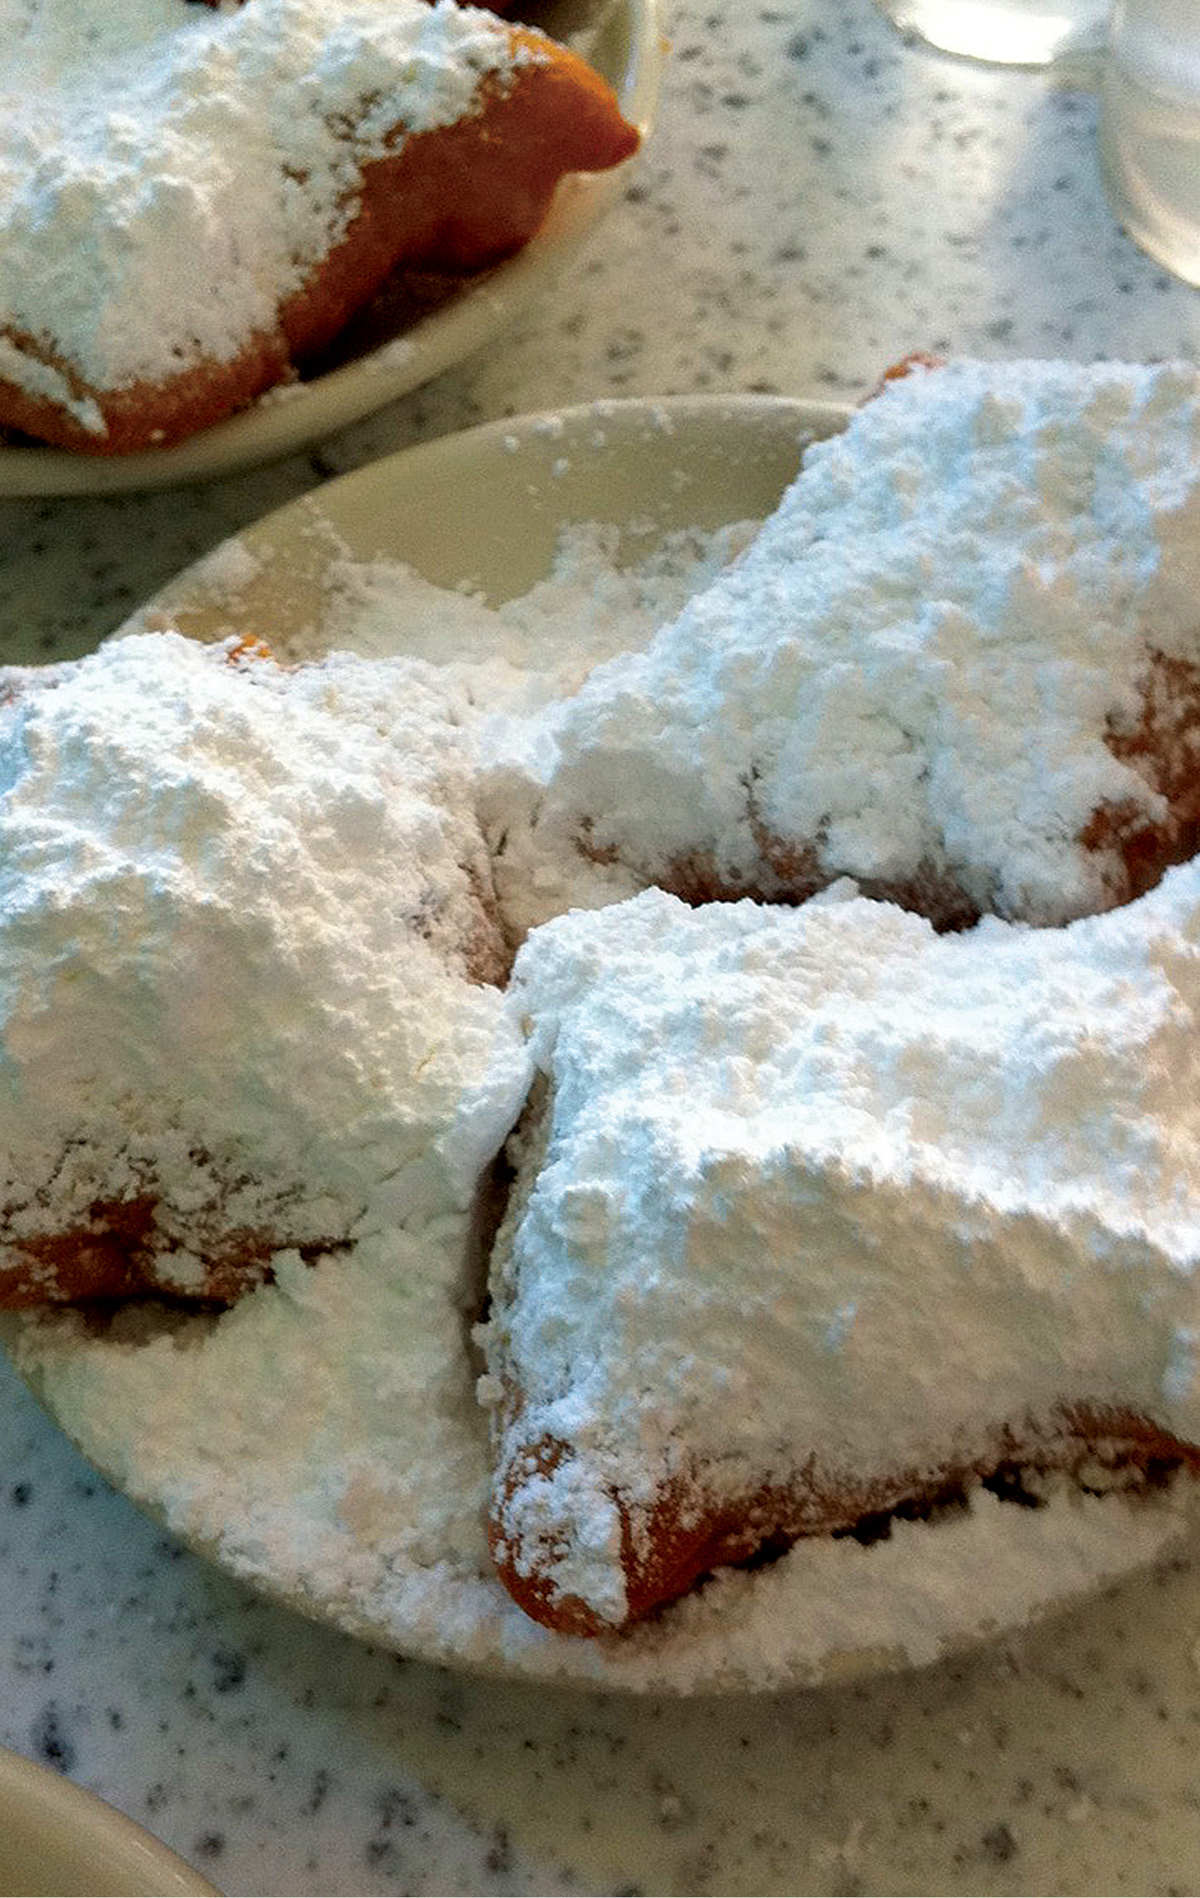 The sugar-mounded beignets of Caf du Monde are a classic treat CONTENTS - photo 5